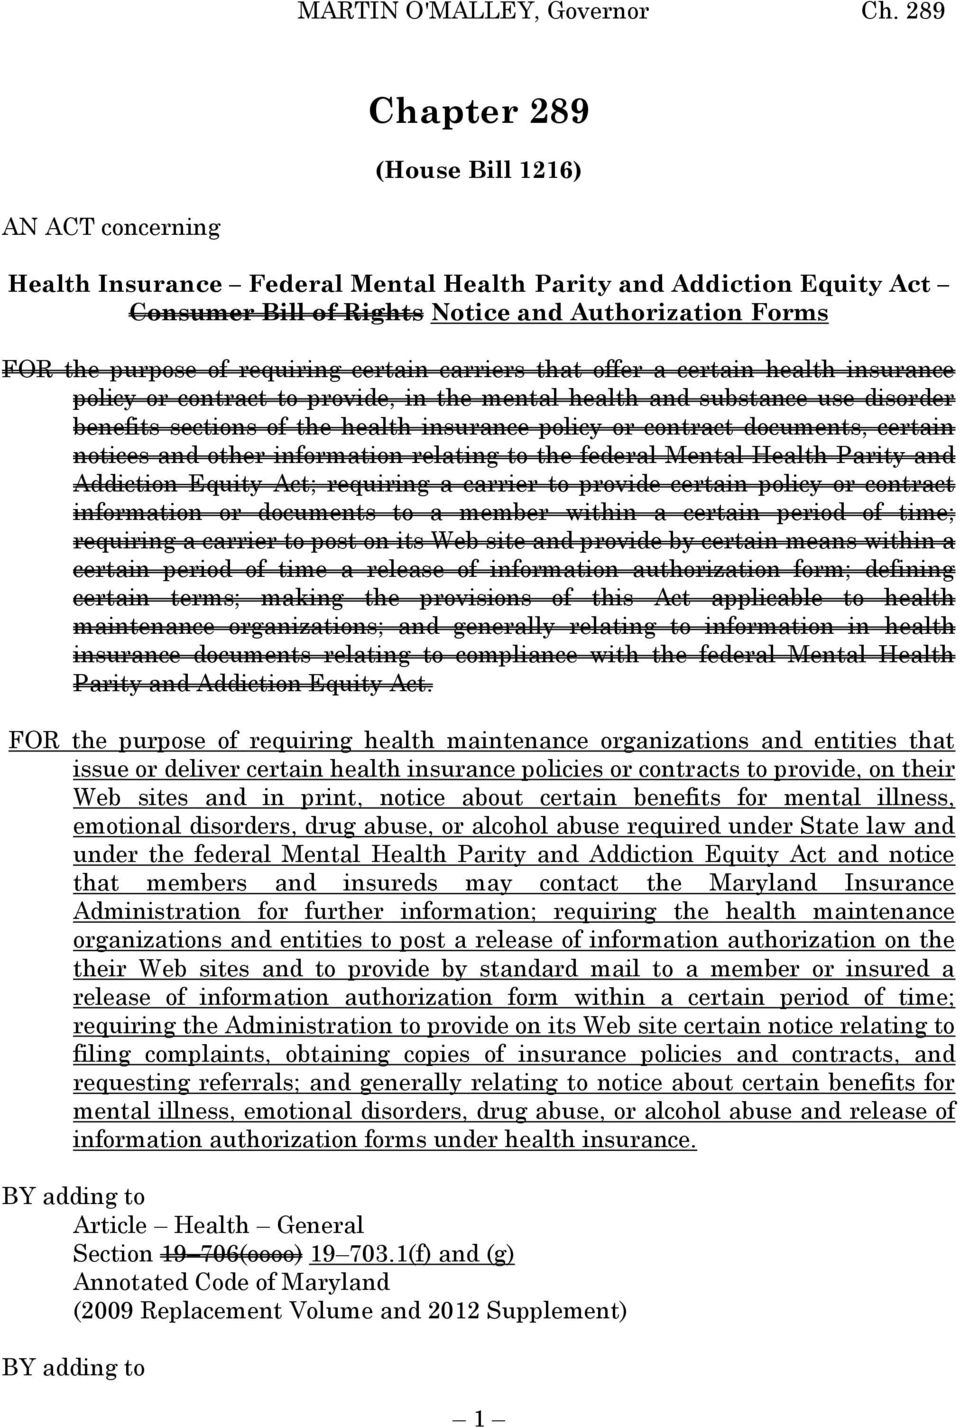 requiring certain carriers that offer a certain health insurance policy or contract to provide, in the mental health and substance use disorder benefits sections of the health insurance policy or